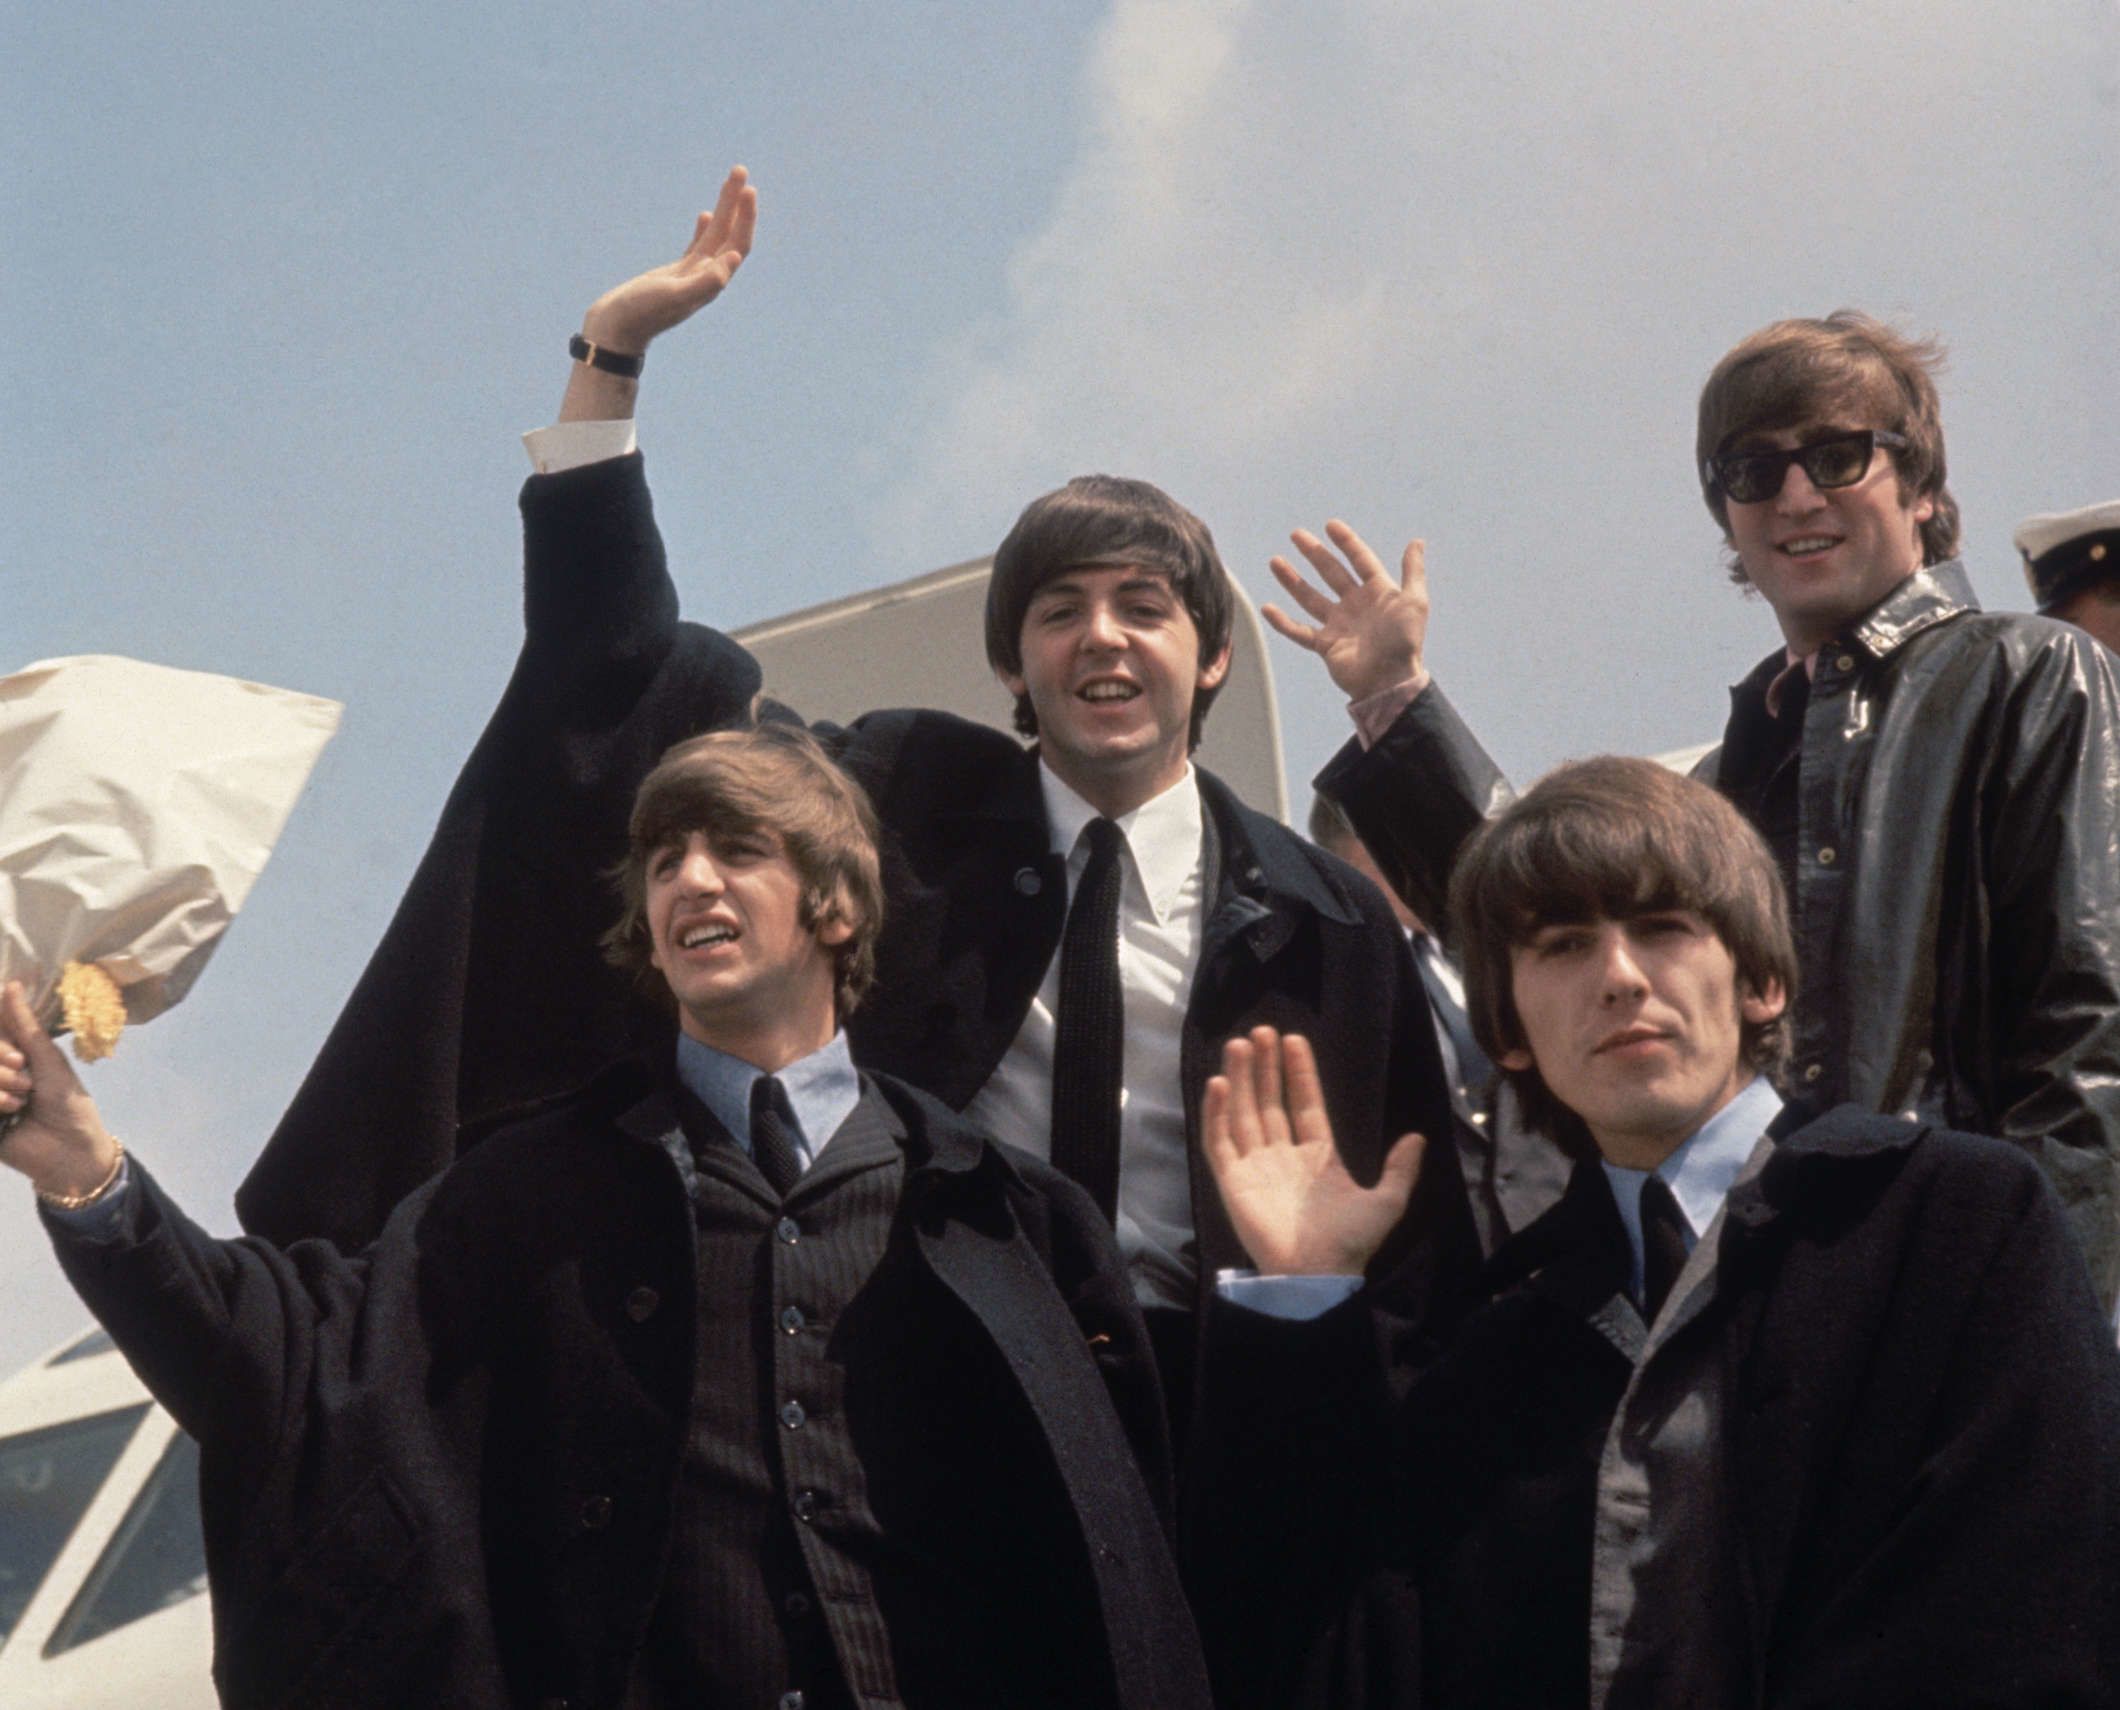 Now and Then: listen to the 'final' Beatles song, The Beatles